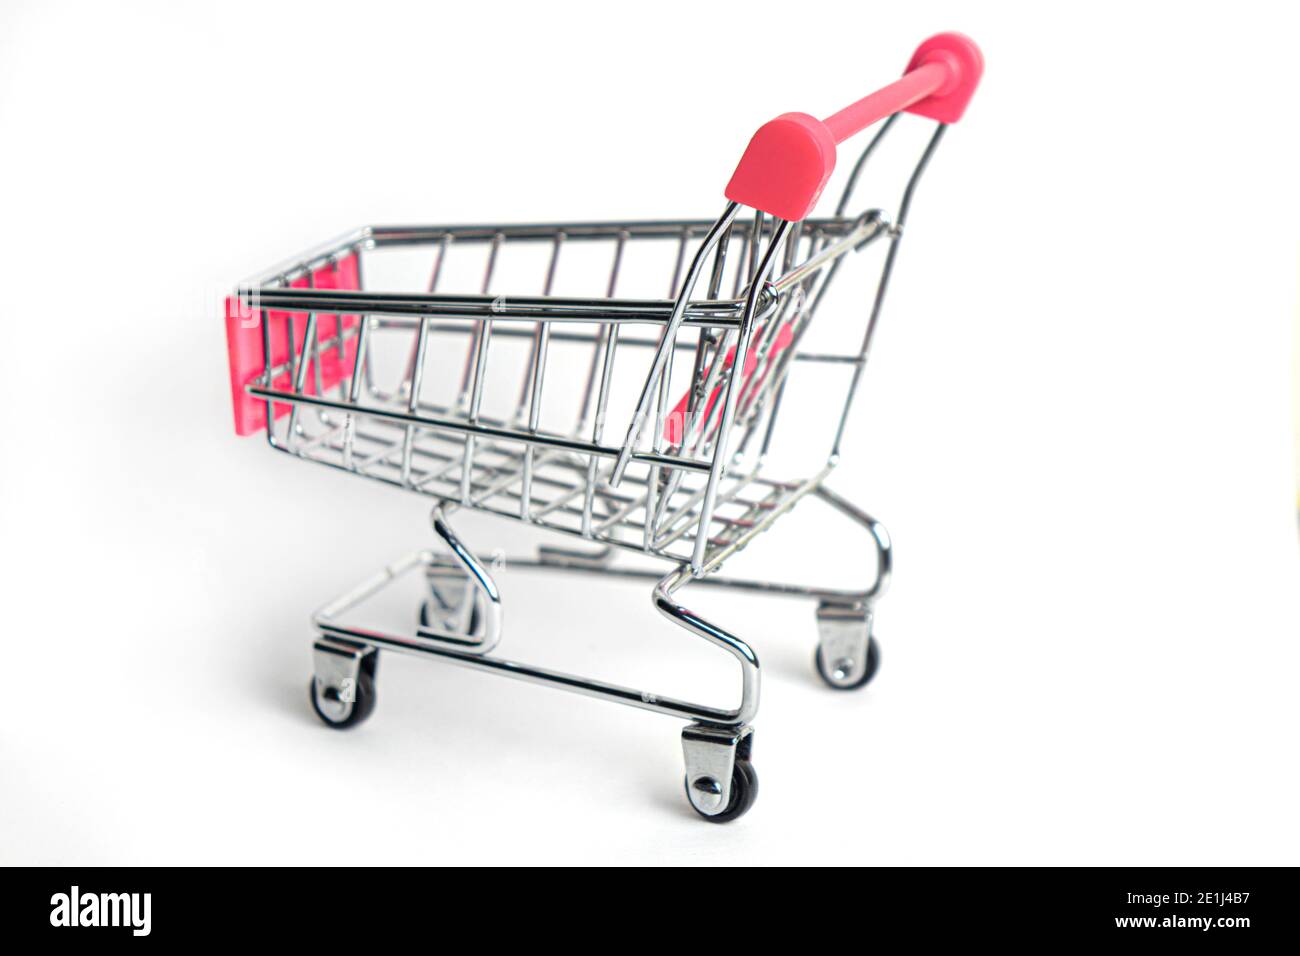 Shopping cart isolated on white background. Business concept. Stock Photo